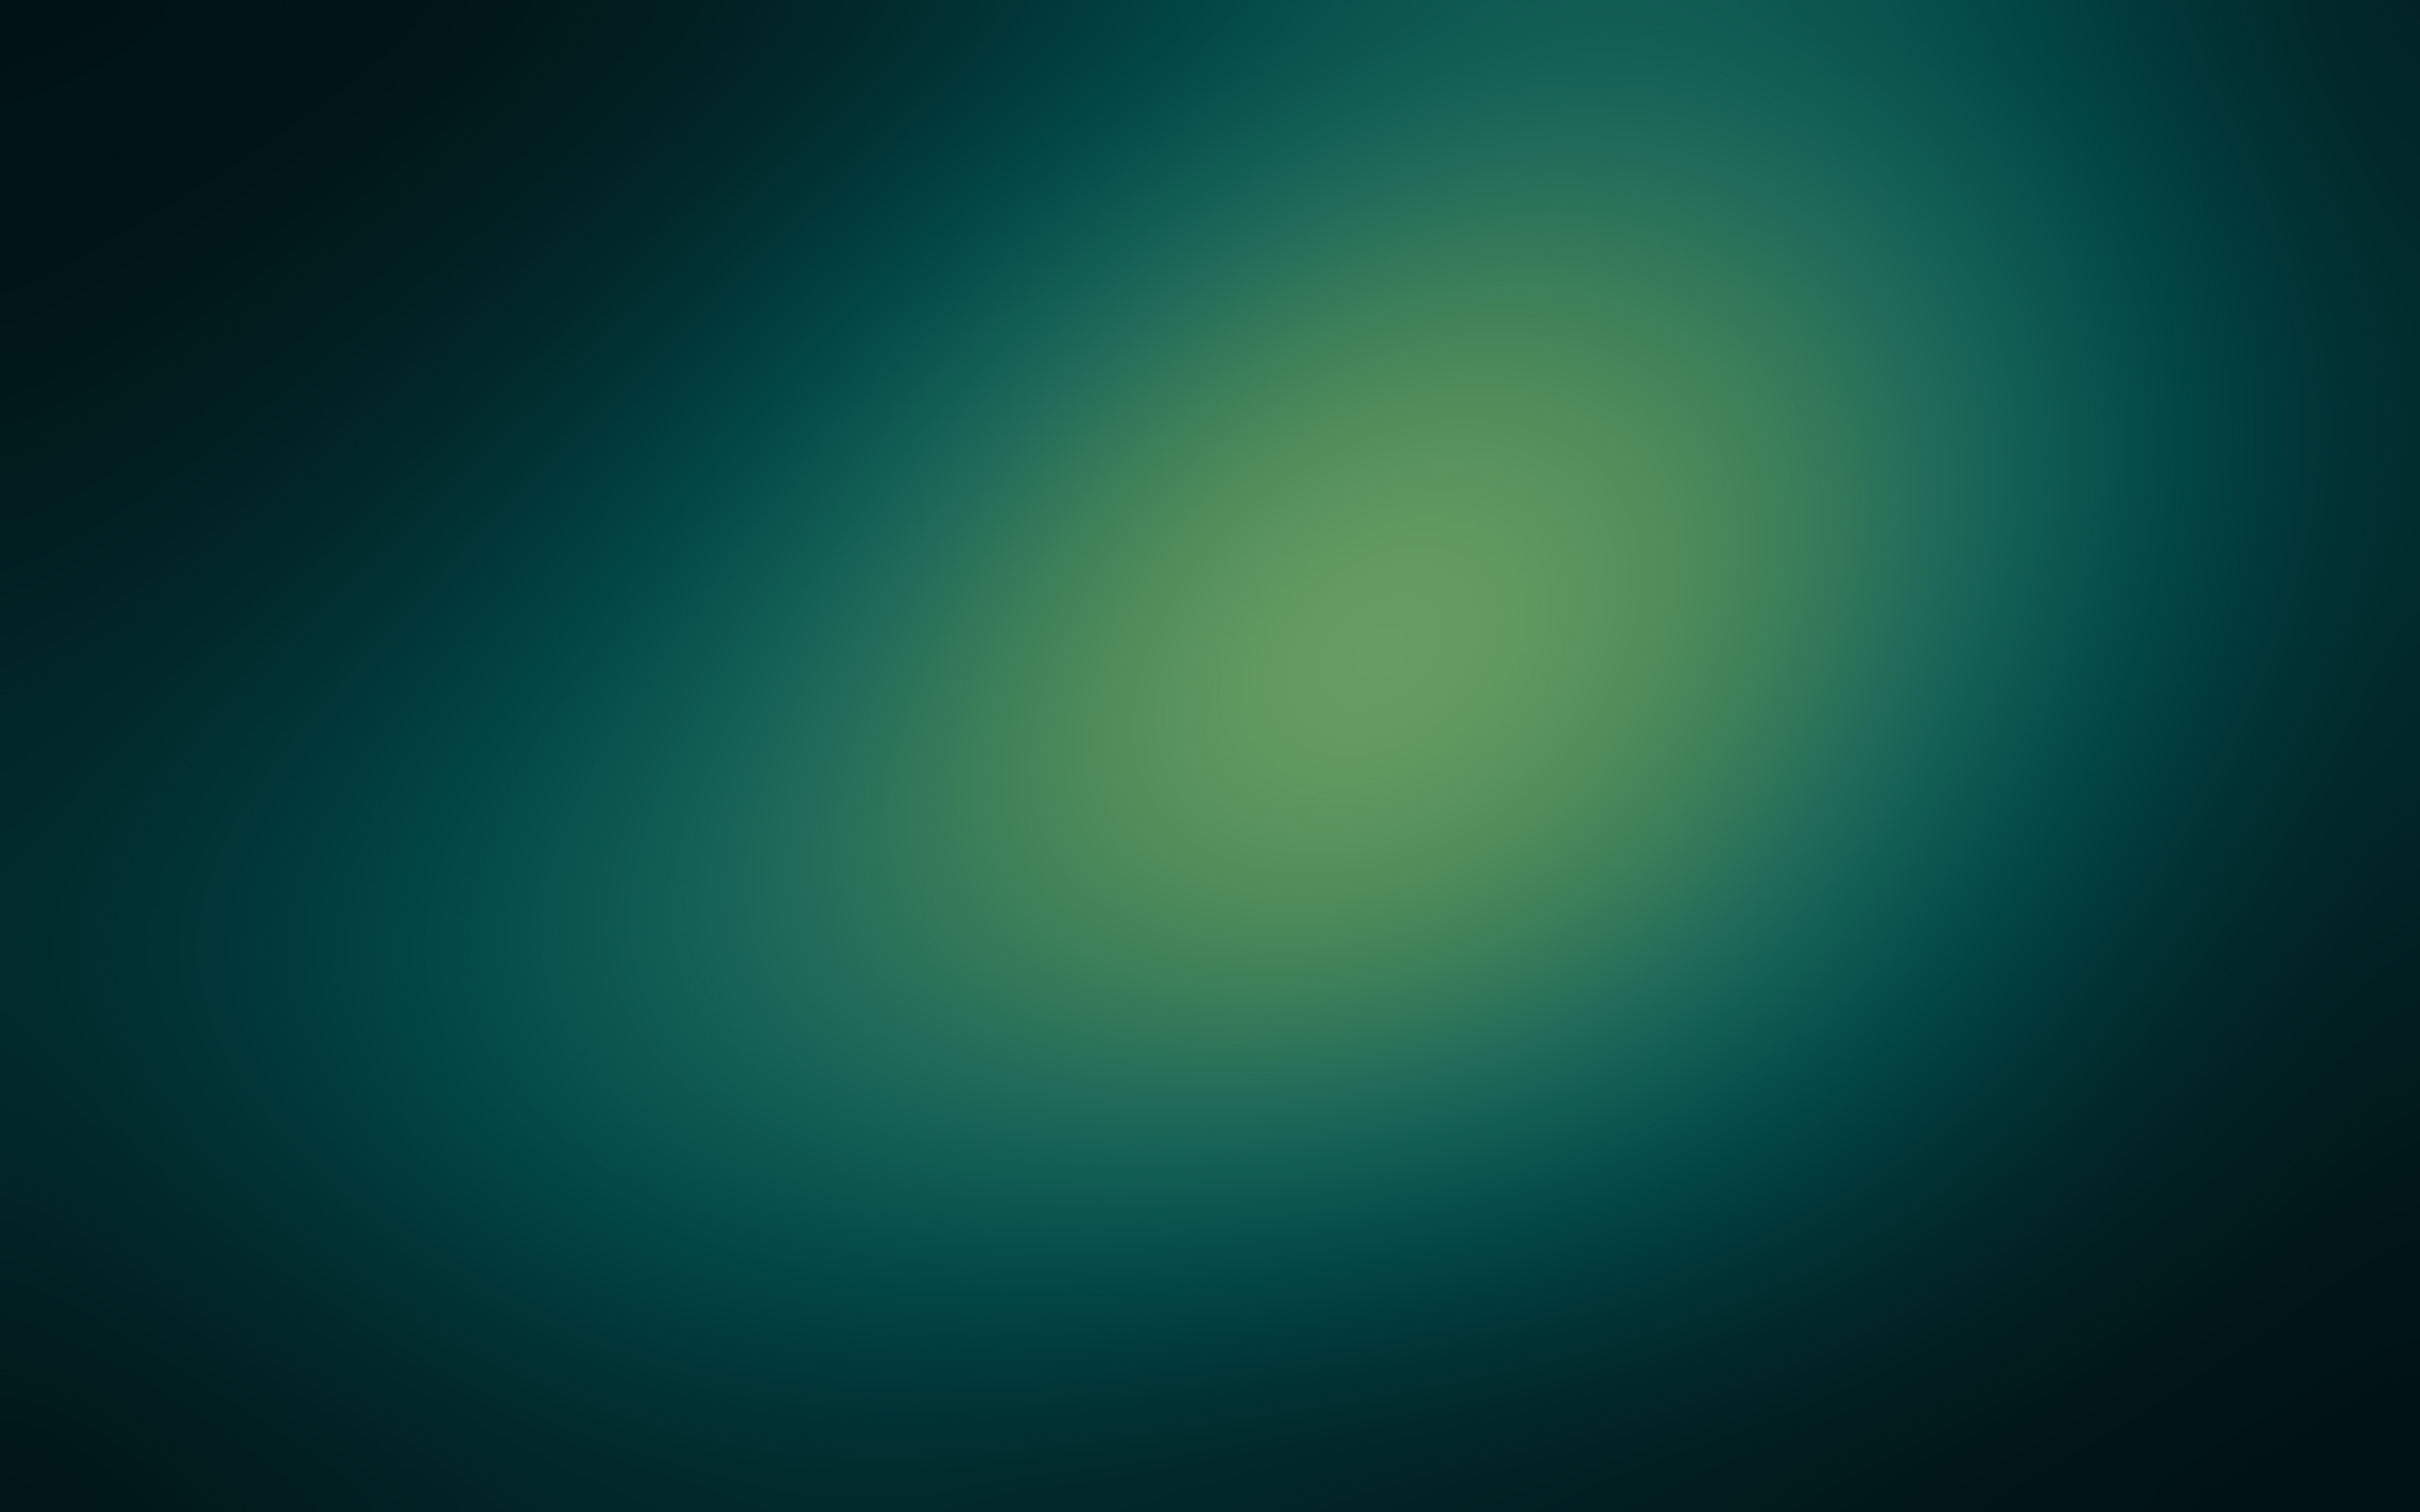 Dark Green Background Image Amp Pictures Becuo